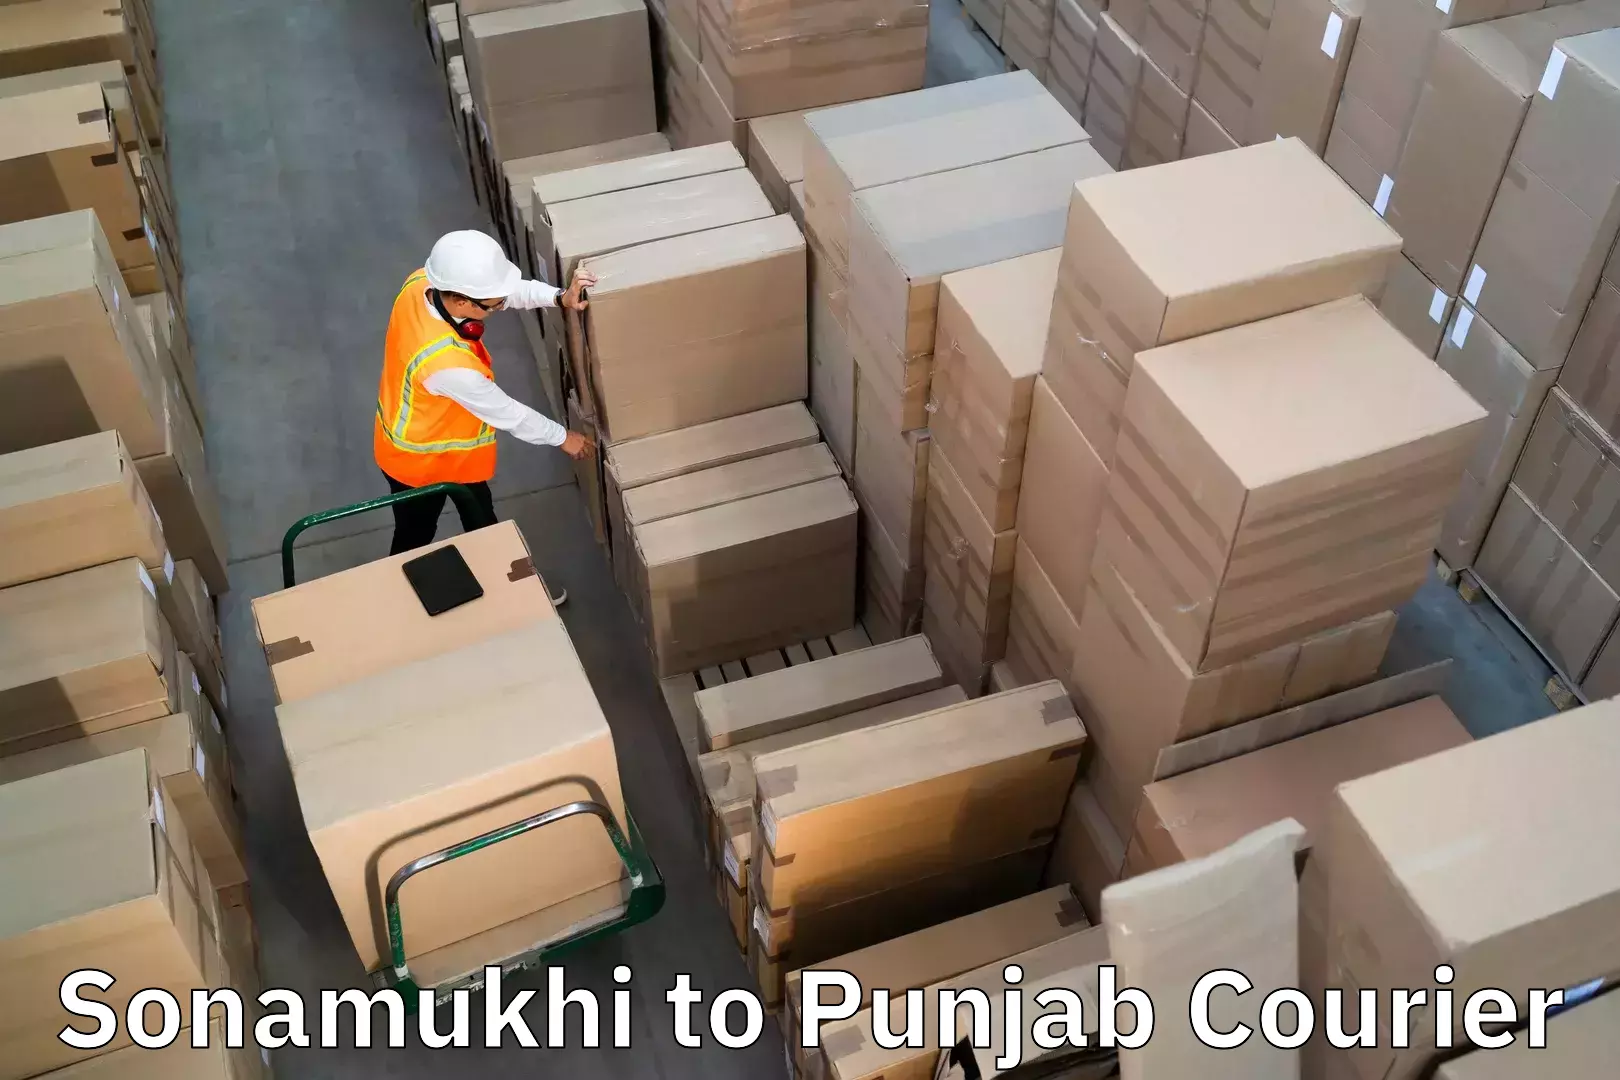 Baggage shipping experience in Sonamukhi to Mohali